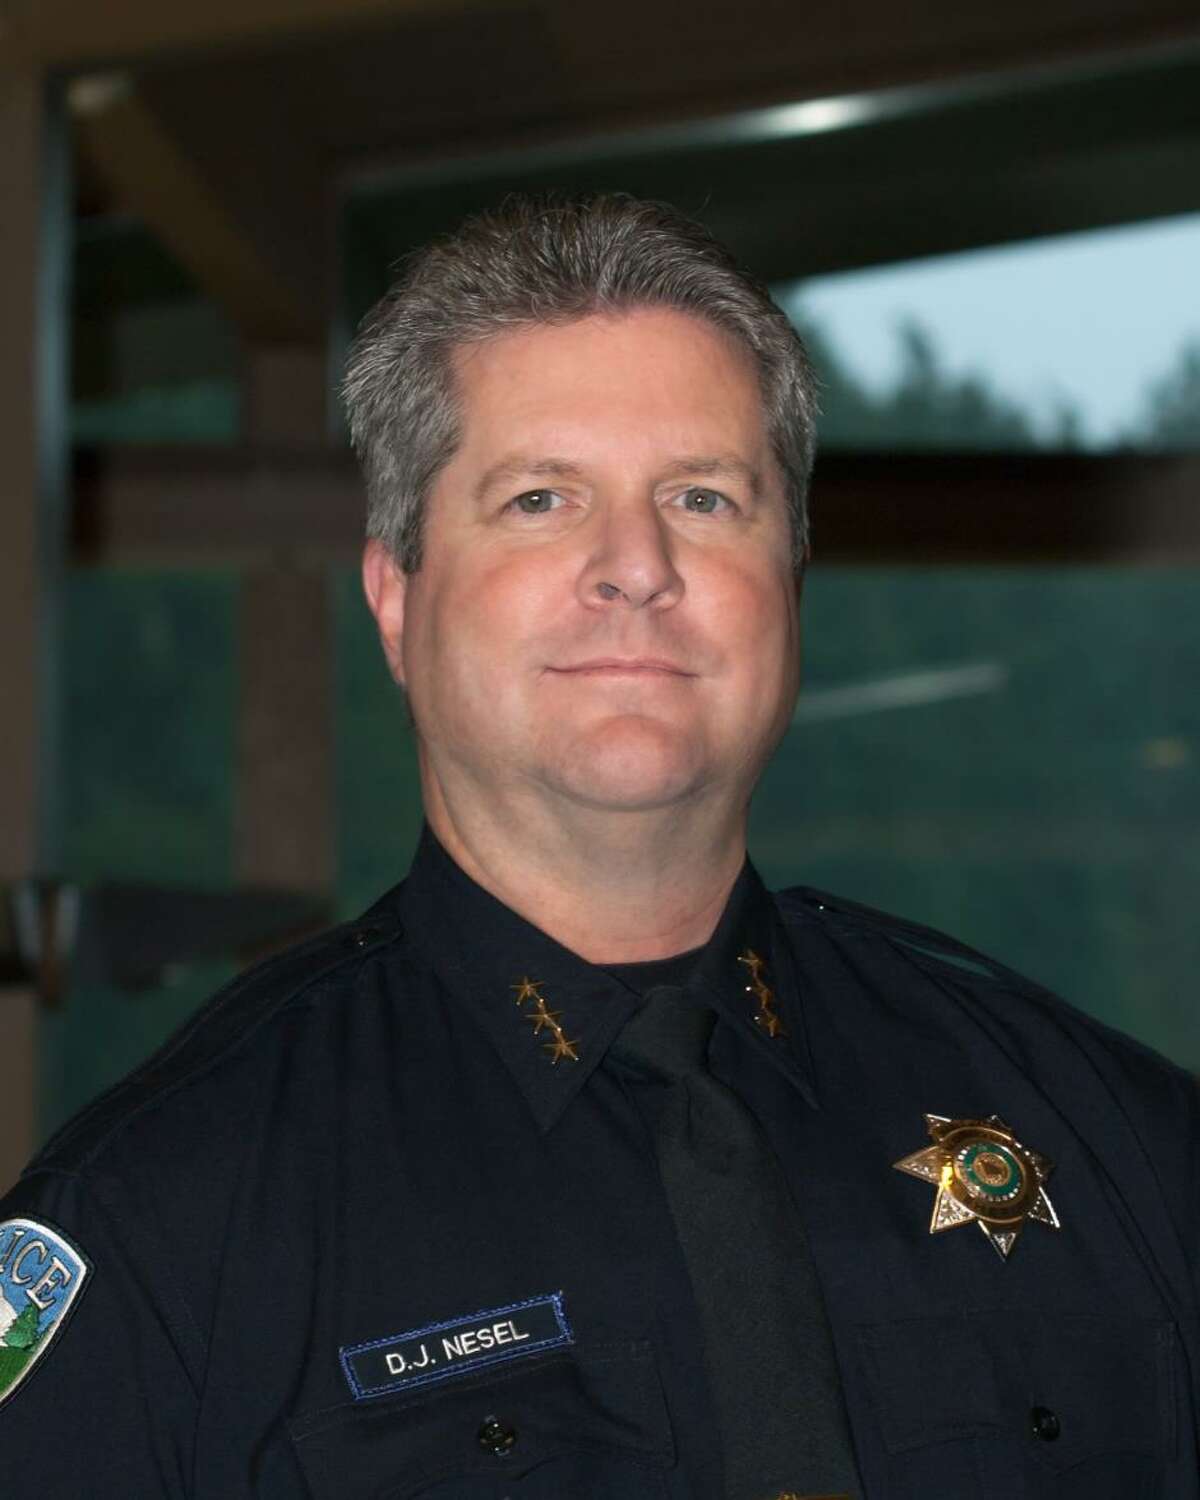 King County Sheriff's Office Capt. D.J. Nesel, pictured in a City of Maple Valley photo.